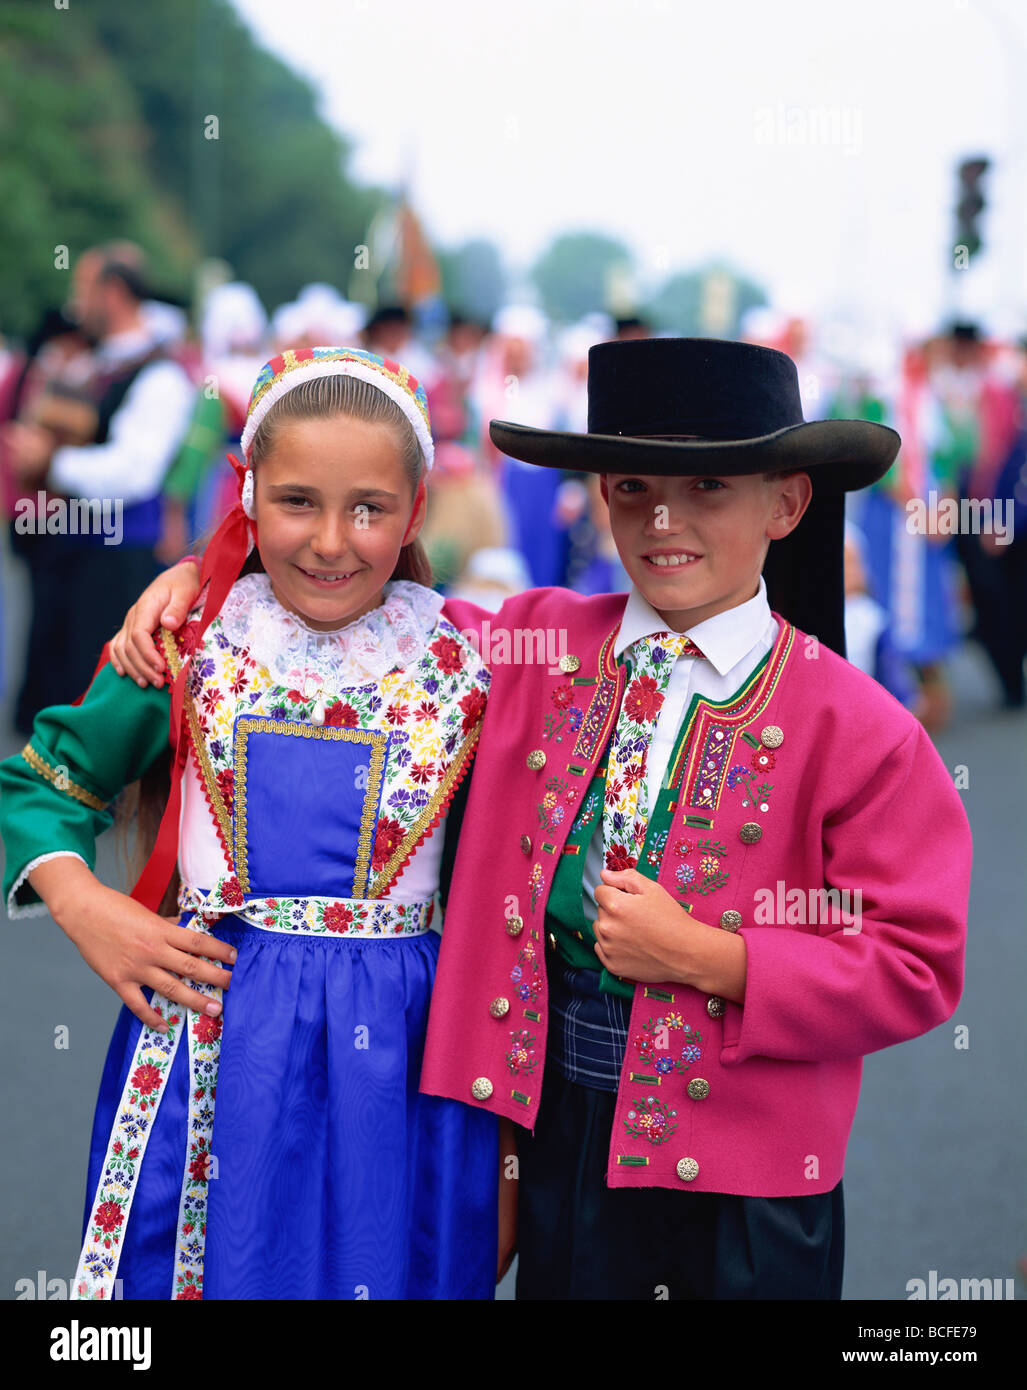 French Traditional Dress For Kids